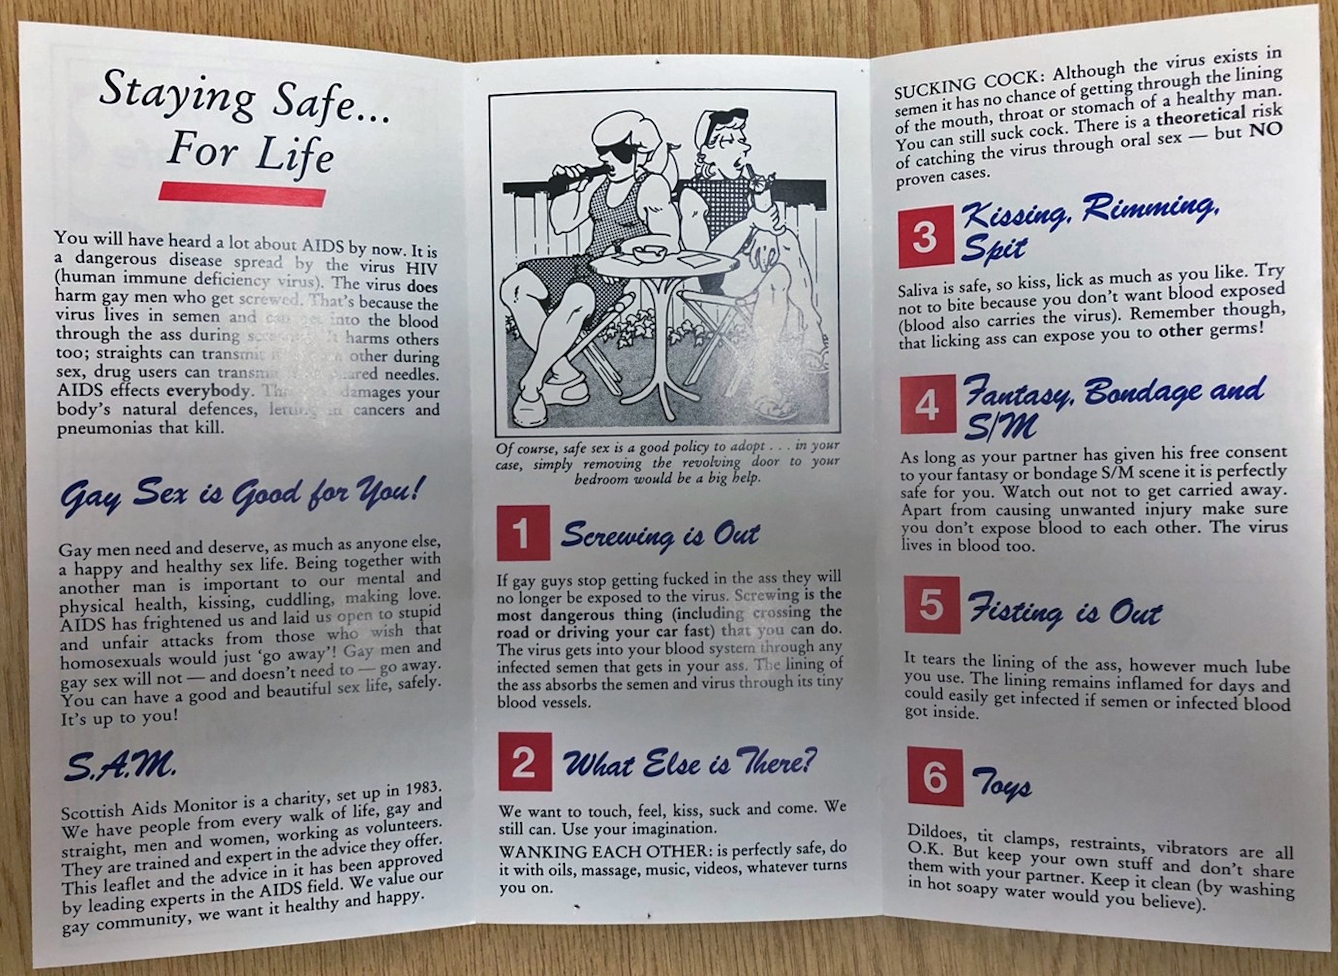 Photograph of the inside of a pamphlet folded in three. The title is "Staying Safe... For Life". In the middle section, there is an image of two women chatting at an outside table, with the caption "Of course, safe sex is a good policy to adopt... in your case, simply removing the revolving door to your bedroom would be a big help." There is information in the pamphlet about the Scottish Aids Monitor and various sexual practices such as fisting, rimming, bondage and toys.